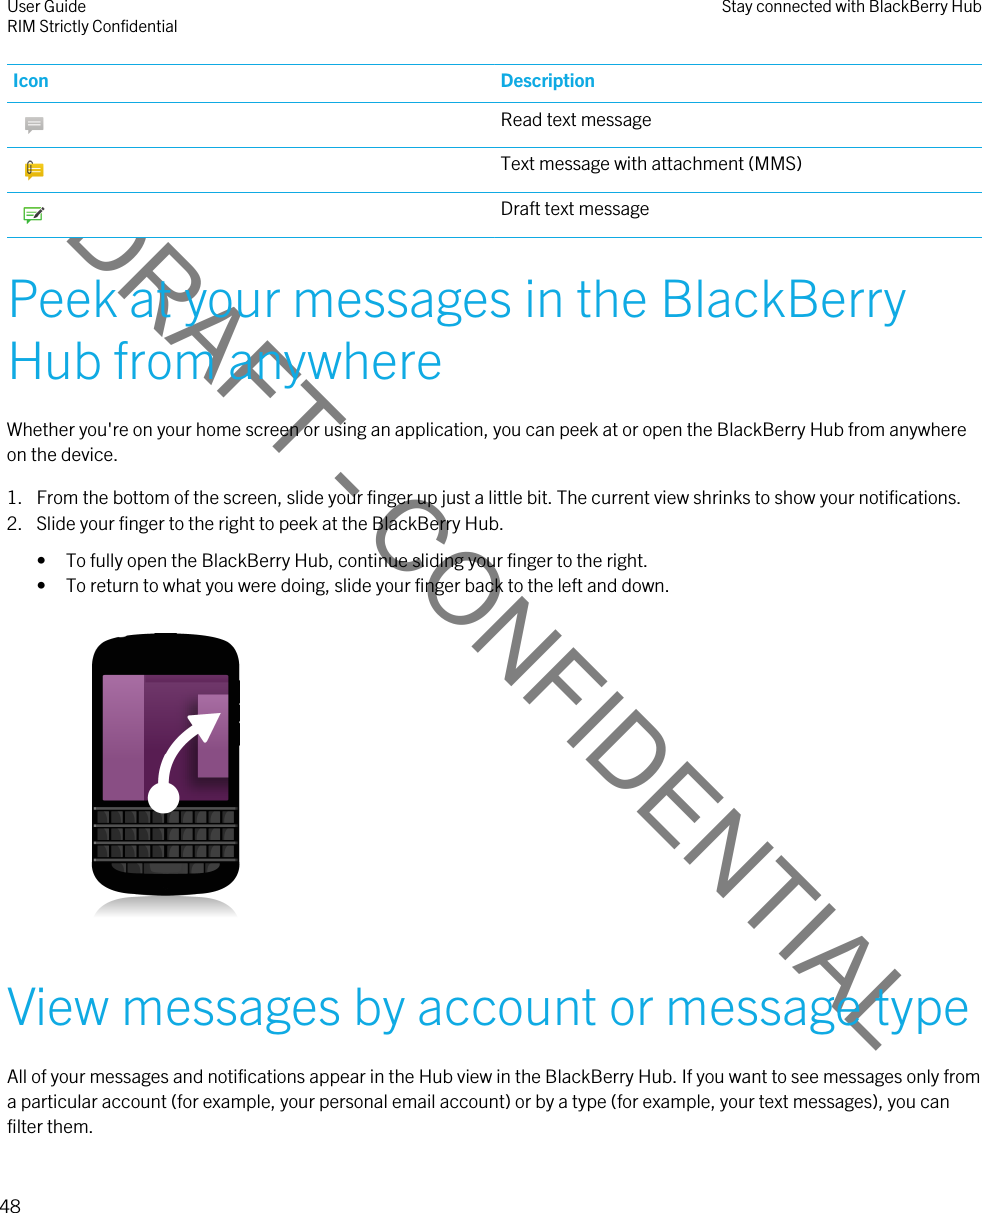 DRAFT - CONFIDENTIALIcon Description Read text message Text message with attachment (MMS) Draft text messagePeek at your messages in the BlackBerry Hub from anywhereWhether you&apos;re on your home screen or using an application, you can peek at or open the BlackBerry Hub from anywhere on the device.1. From the bottom of the screen, slide your finger up just a little bit. The current view shrinks to show your notifications.2. Slide your finger to the right to peek at the BlackBerry Hub.• To fully open the BlackBerry Hub, continue sliding your finger to the right.• To return to what you were doing, slide your finger back to the left and down. View messages by account or message typeAll of your messages and notifications appear in the Hub view in the BlackBerry Hub. If you want to see messages only from a particular account (for example, your personal email account) or by a type (for example, your text messages), you can filter them.User GuideRIM Strictly Confidential Stay connected with BlackBerry Hub48 